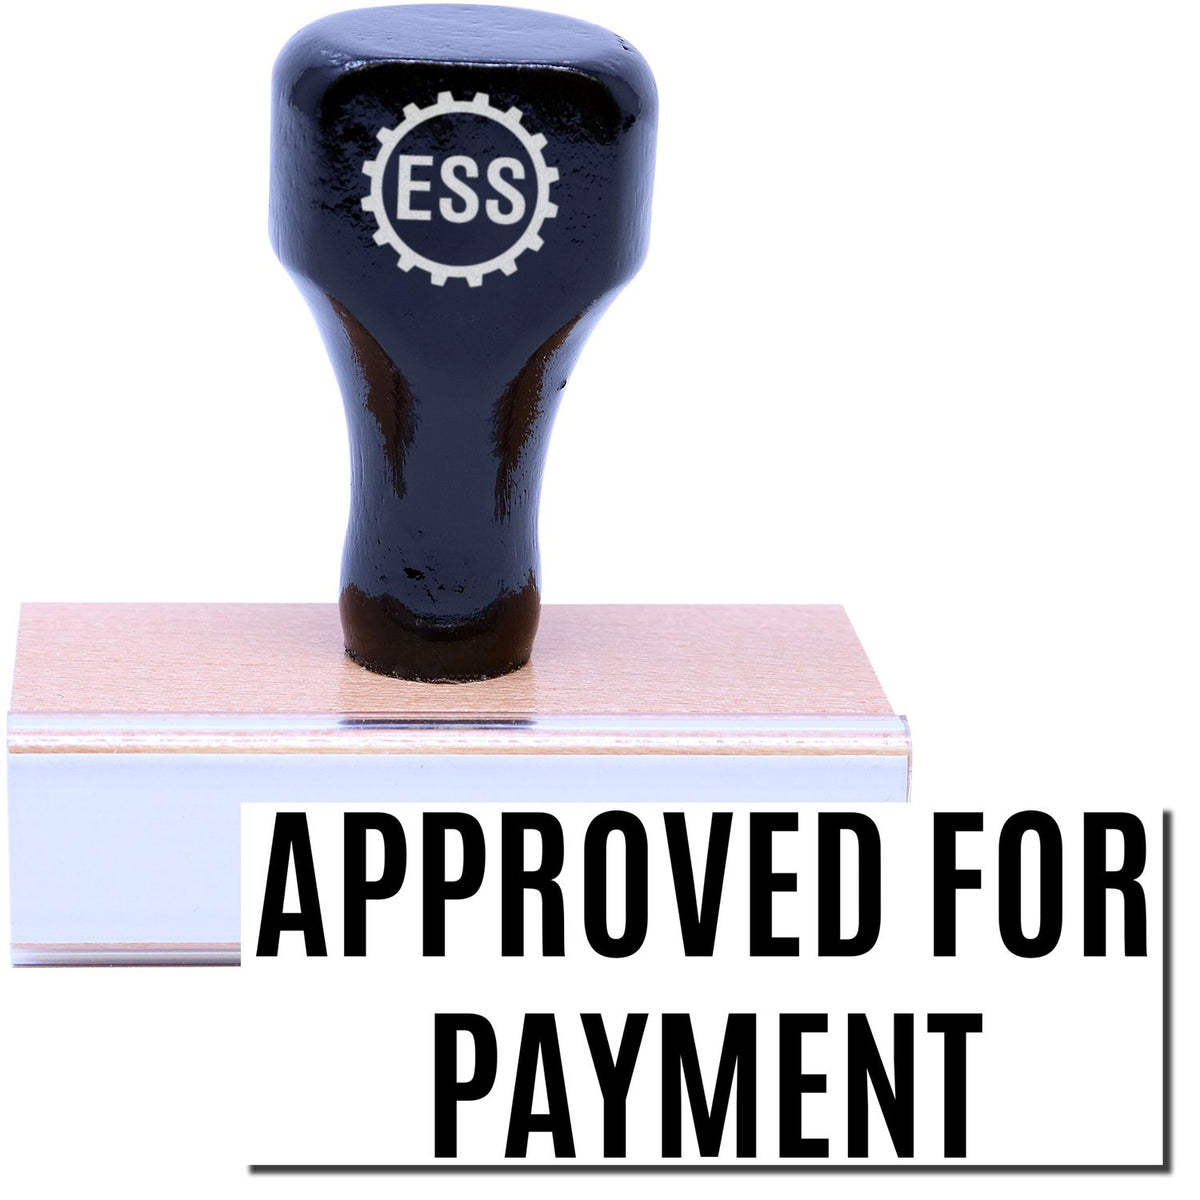 A stock office rubber stamp with a stamped image showing how the text &quot;APPROVED FOR PAYMENT&quot; in a narrow font is displayed after stamping.